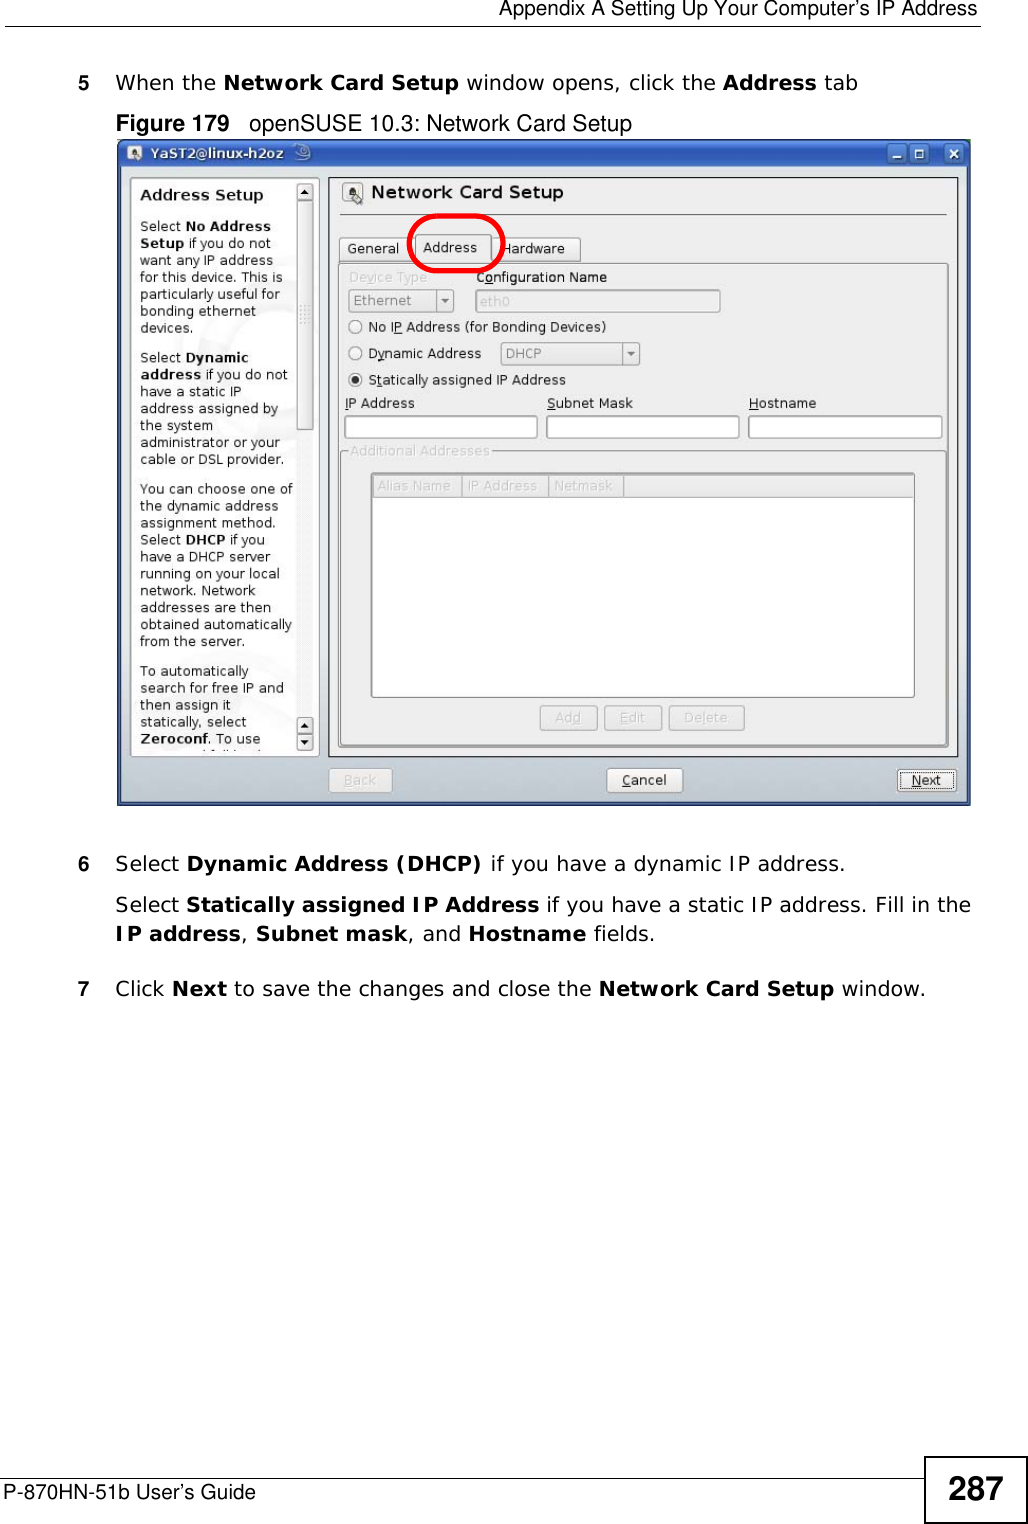  Appendix A Setting Up Your Computer’s IP AddressP-870HN-51b User’s Guide 2875When the Network Card Setup window opens, click the Address tabFigure 179   openSUSE 10.3: Network Card Setup6Select Dynamic Address (DHCP) if you have a dynamic IP address.Select Statically assigned IP Address if you have a static IP address. Fill in the IP address, Subnet mask, and Hostname fields.7Click Next to save the changes and close the Network Card Setup window. 